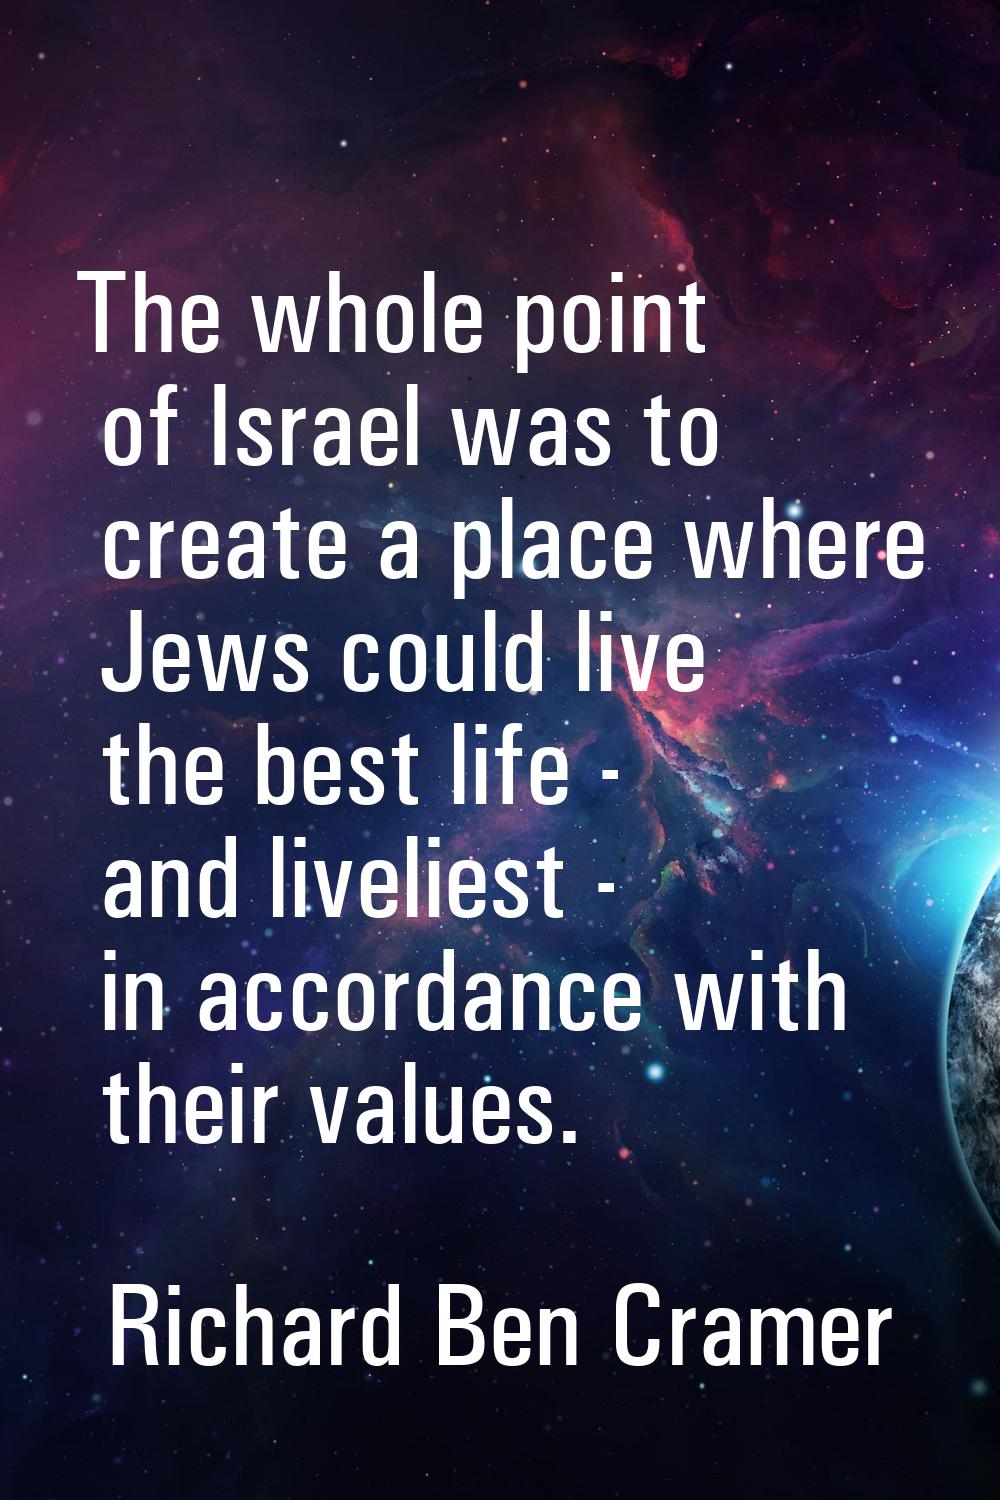 The whole point of Israel was to create a place where Jews could live the best life - and liveliest